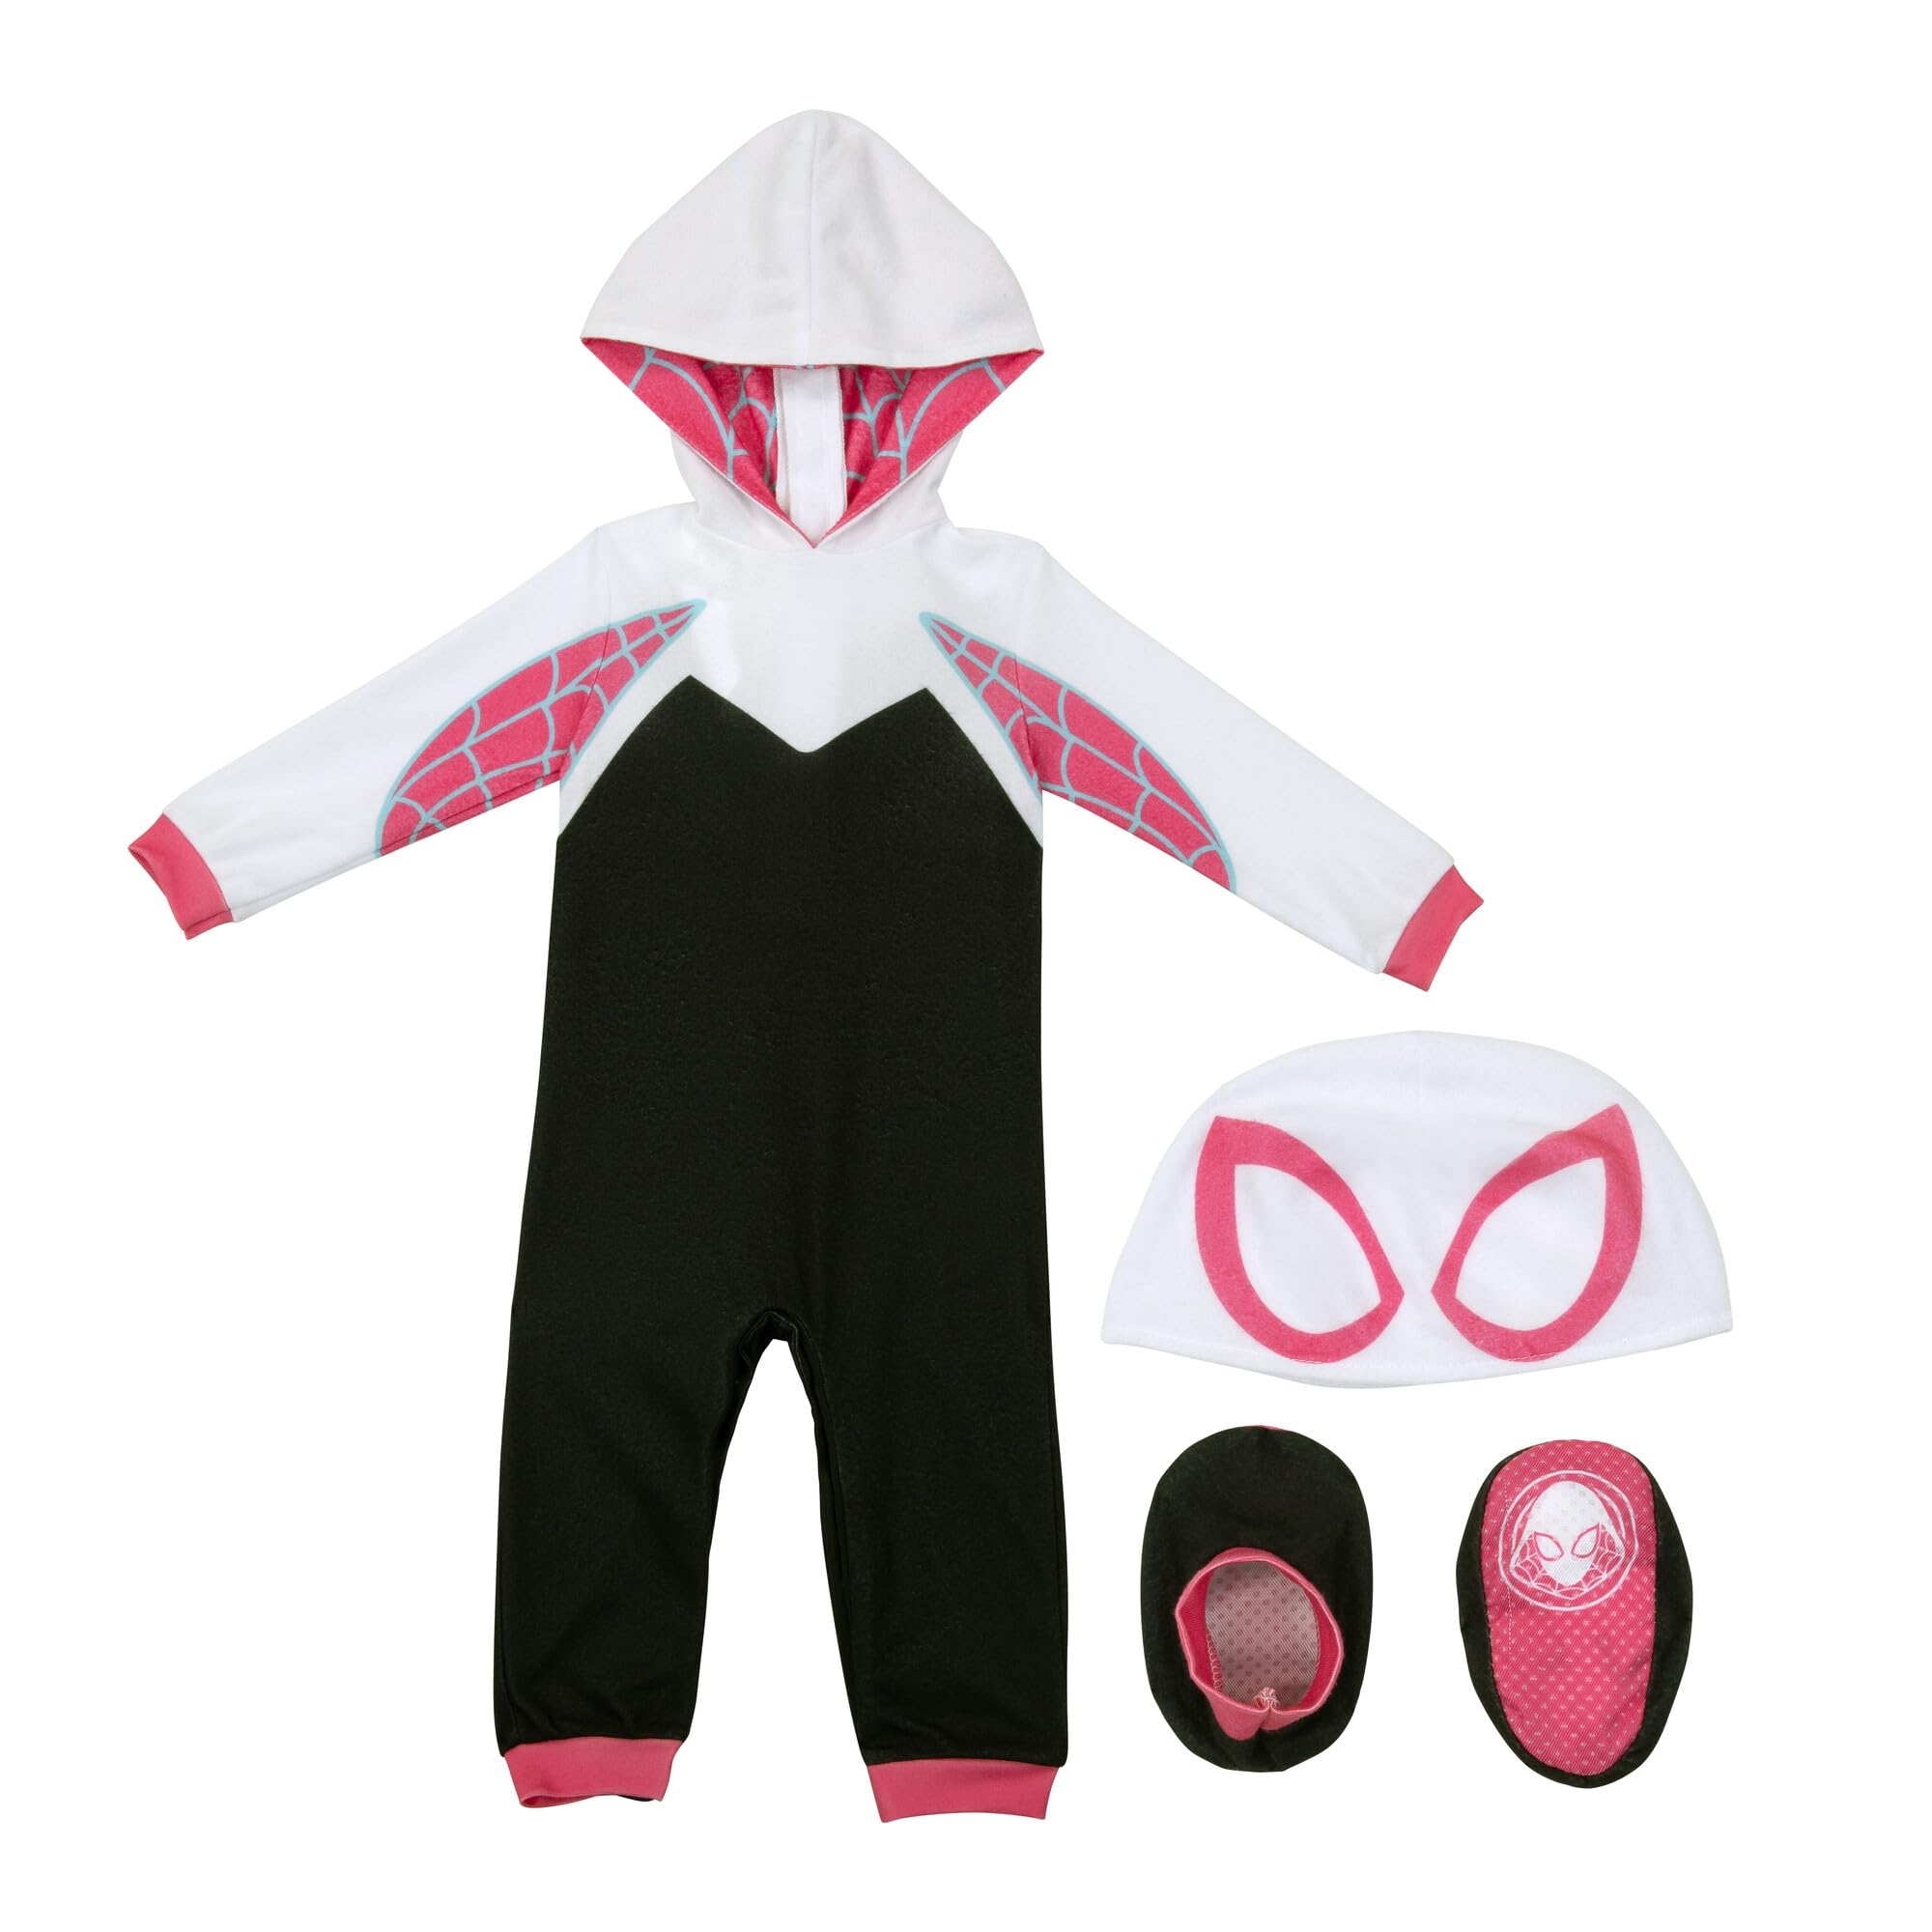 MARVEL Spider-Gwen Official Infant Deluxe Costume - Premium Quality Minky Fabric and Non-Slip Grip Booties 6/12 Months